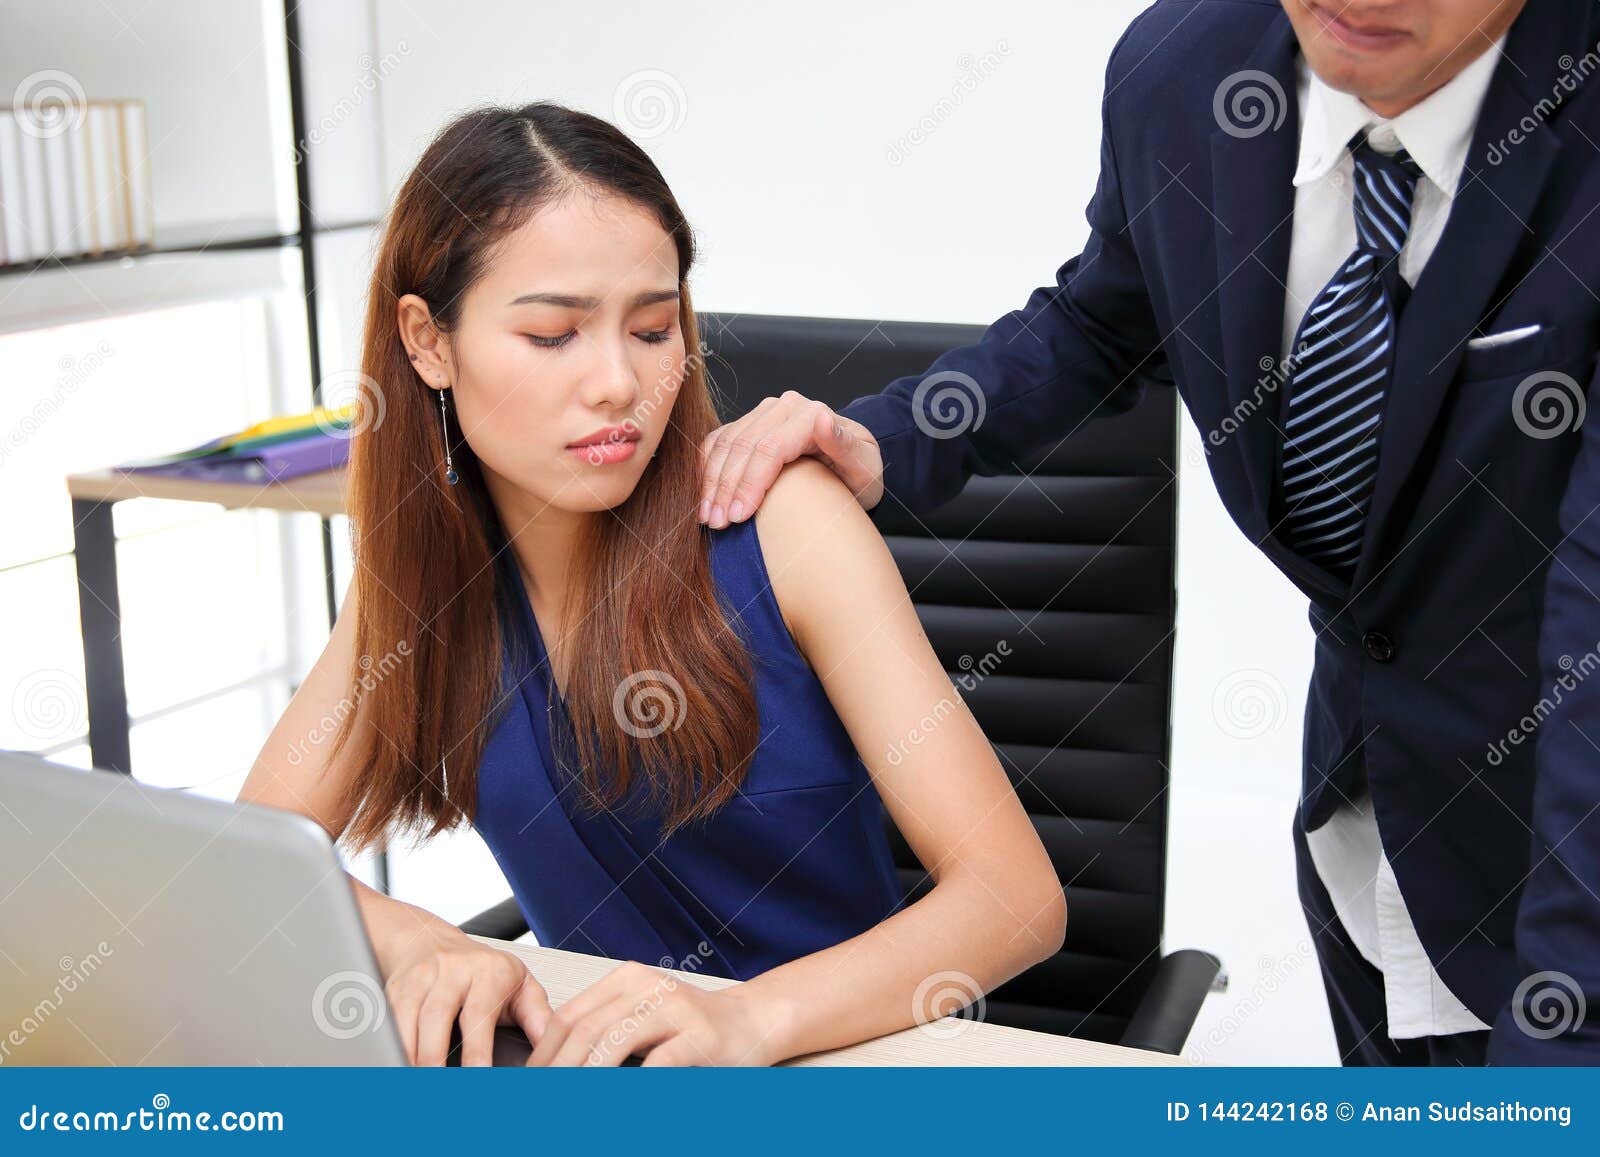 Boss Touching Shoulder Of A Young Female Employee In Office At Workplace She Is Uncomfortable